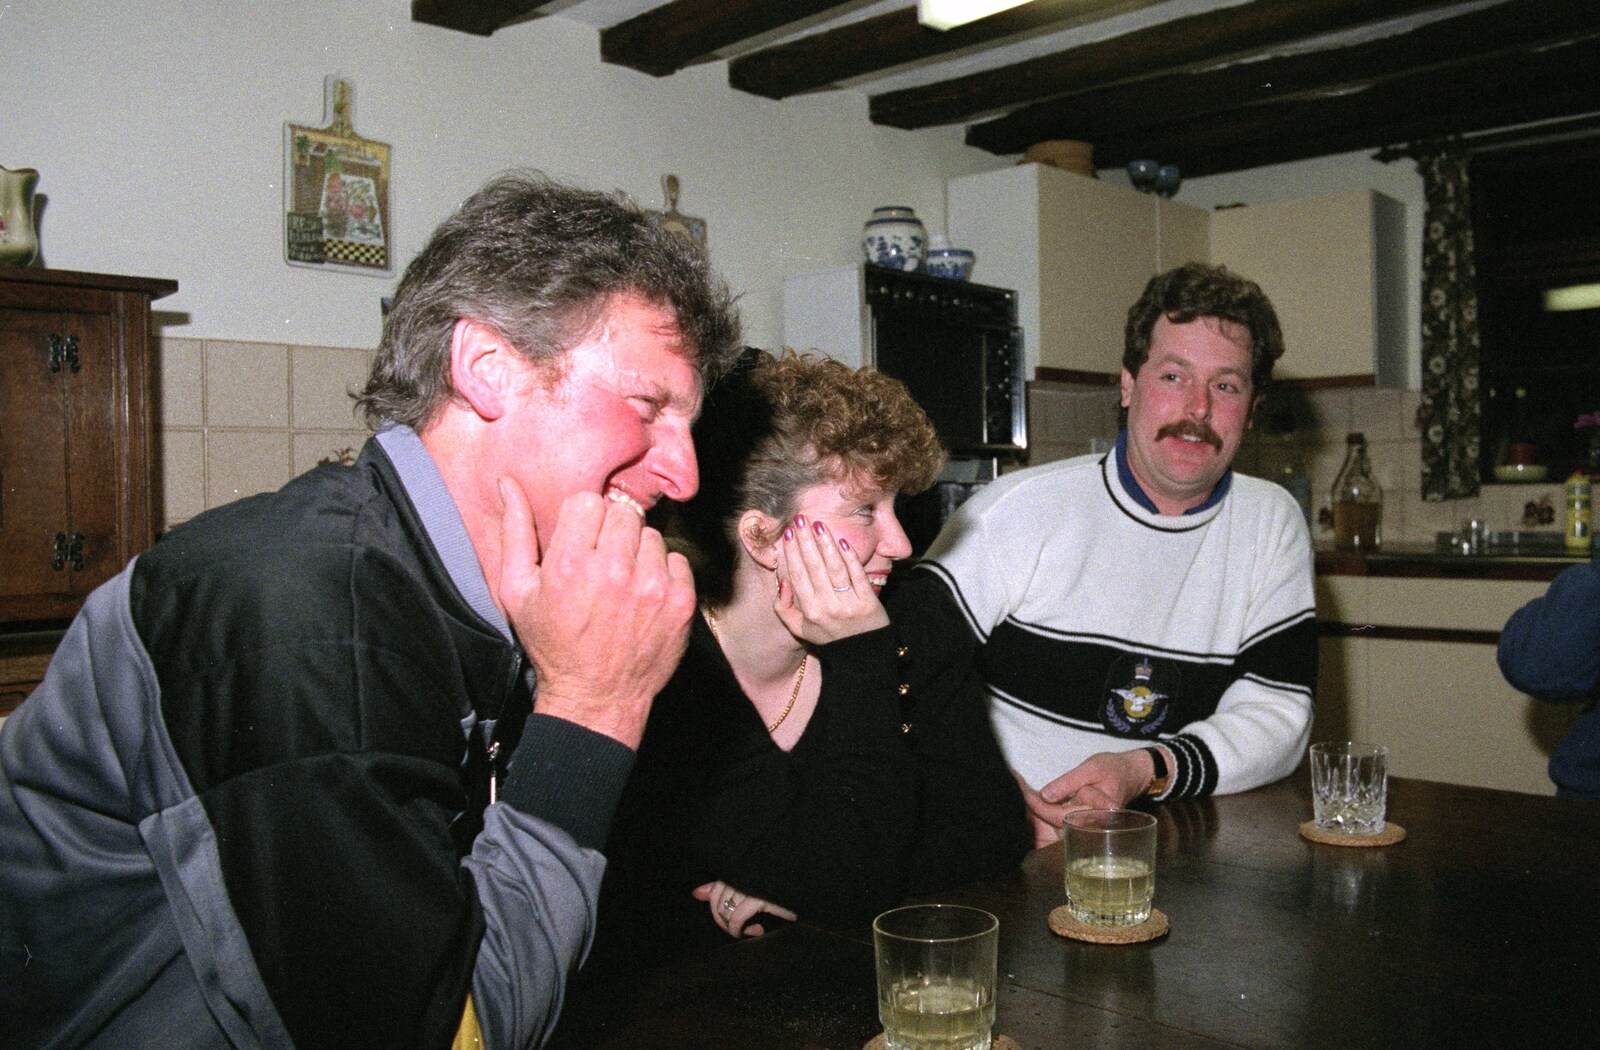 There's another cider night in Stuston from A Little Clacton Party and the Polling Caravan, Stuston, Suffolk - 4th May 1991